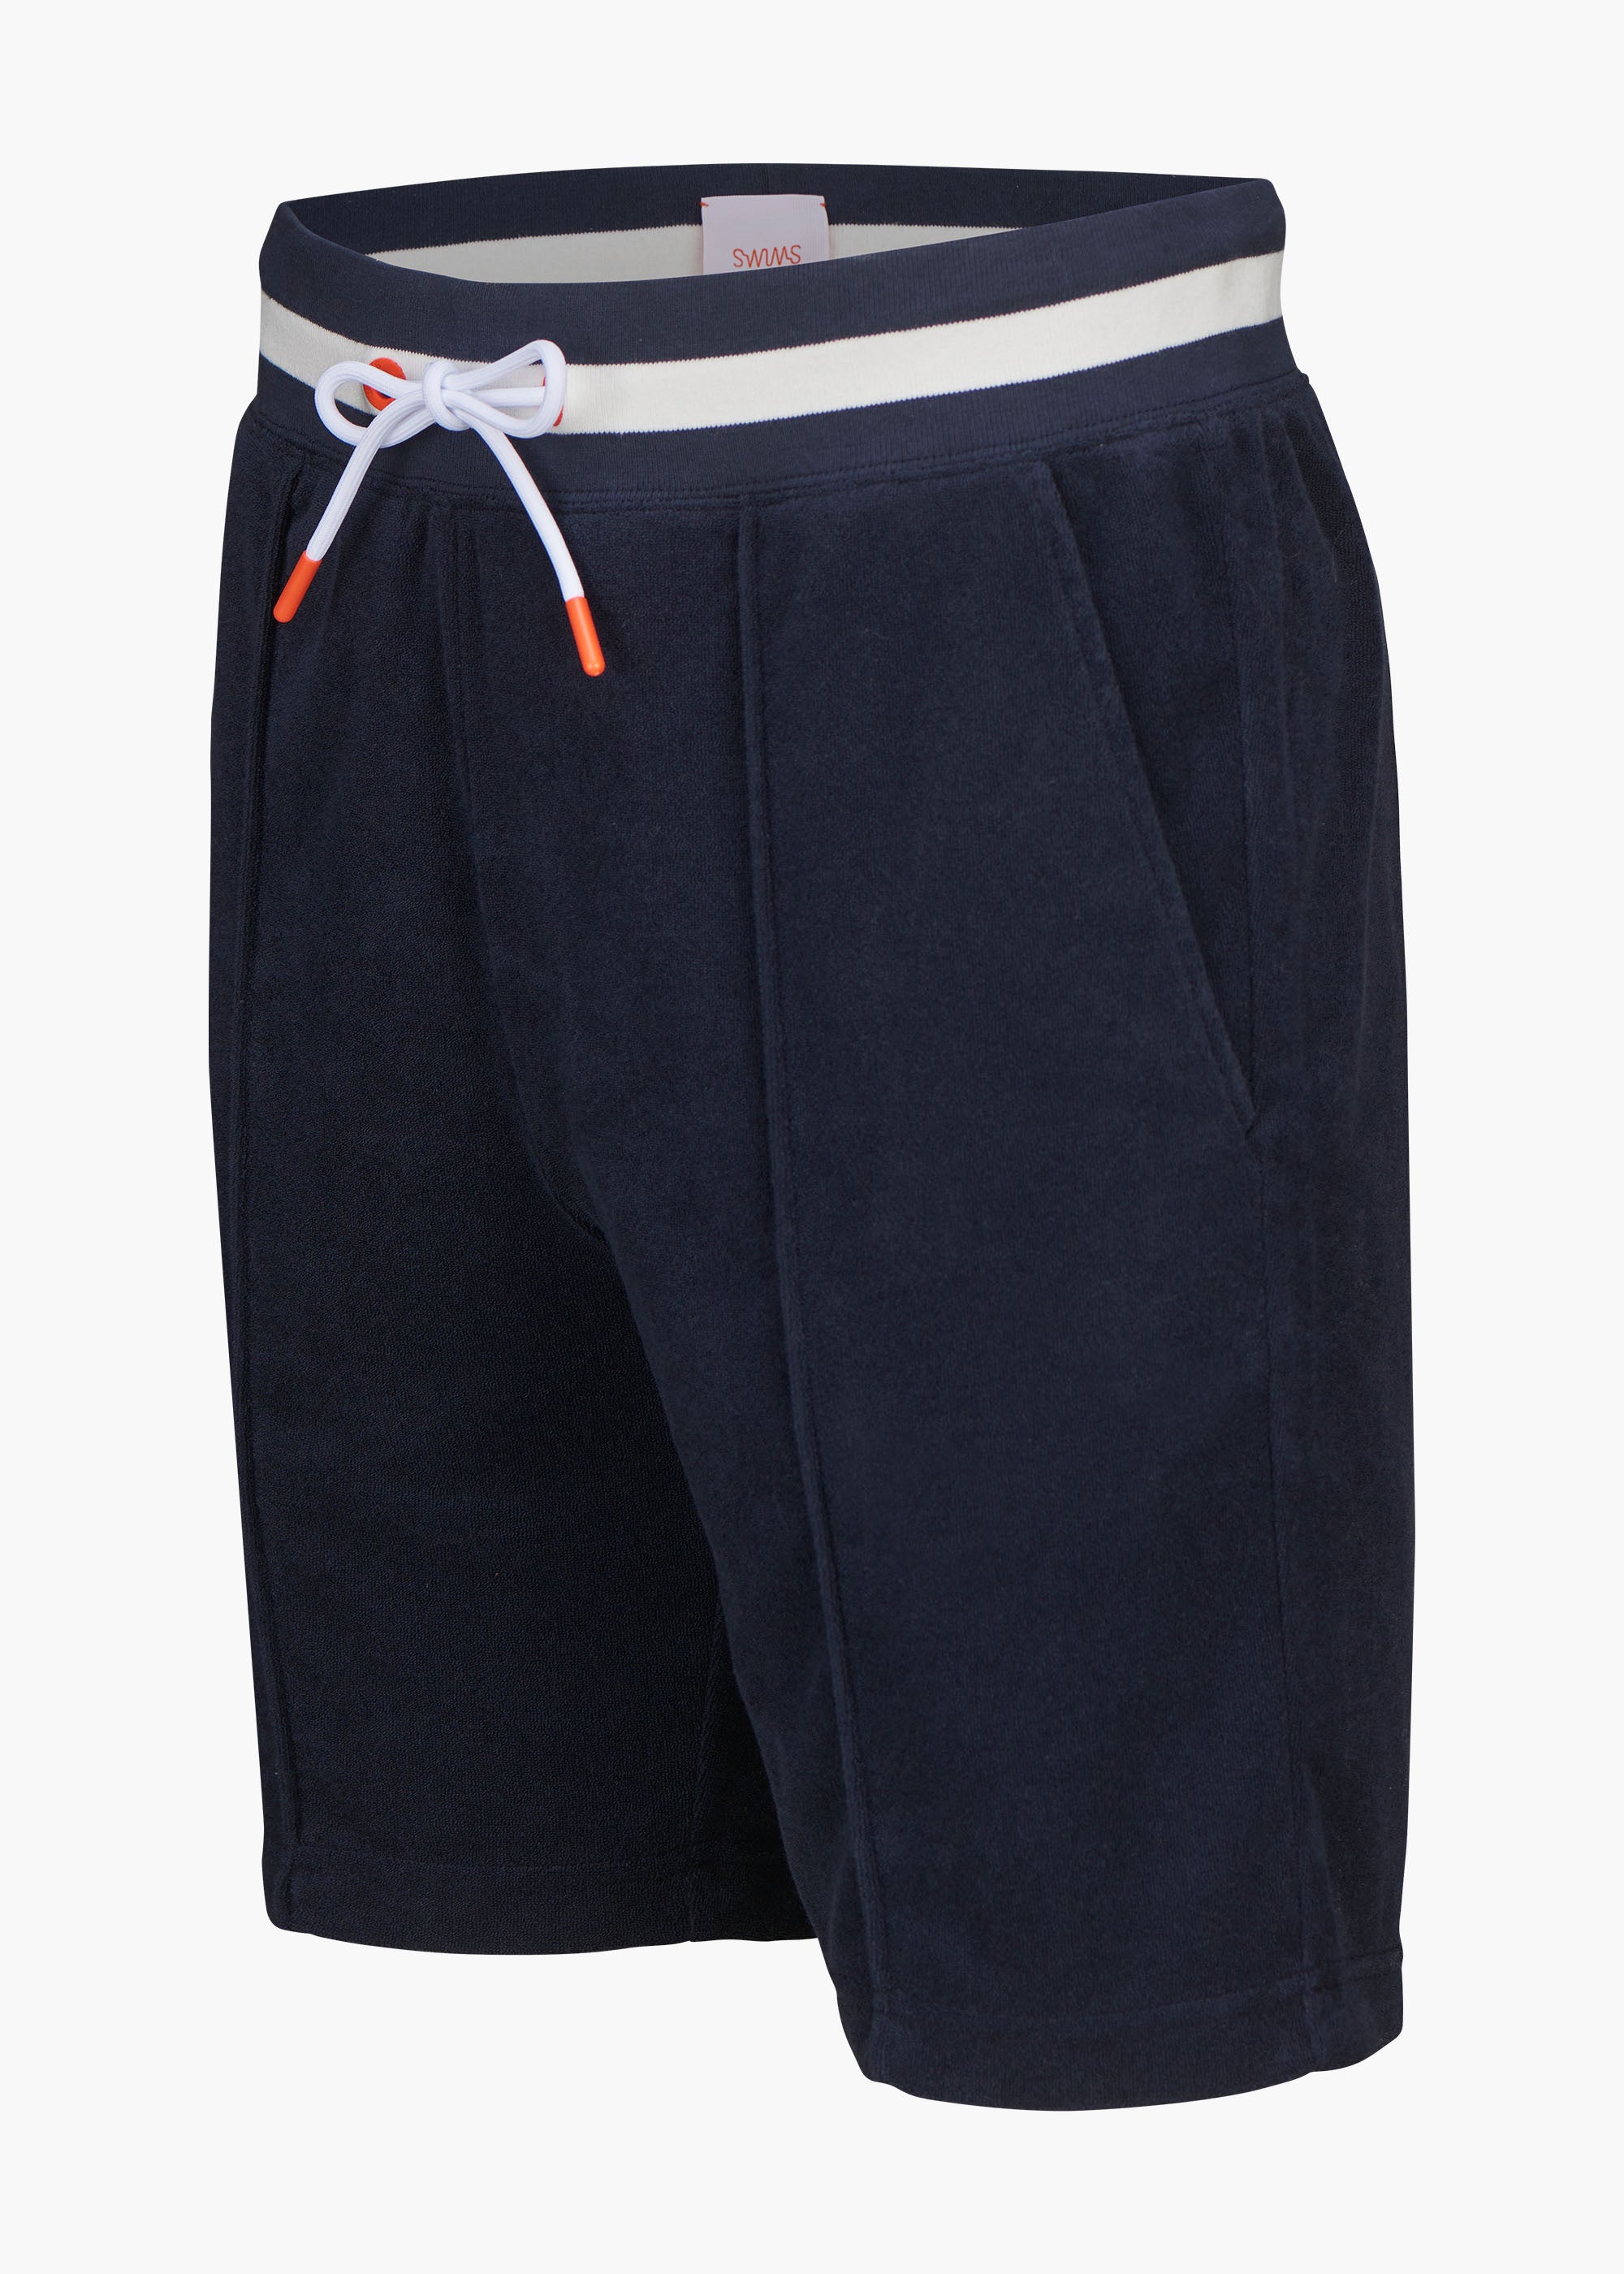 Lido Terry Short - background::white,variant::Navy